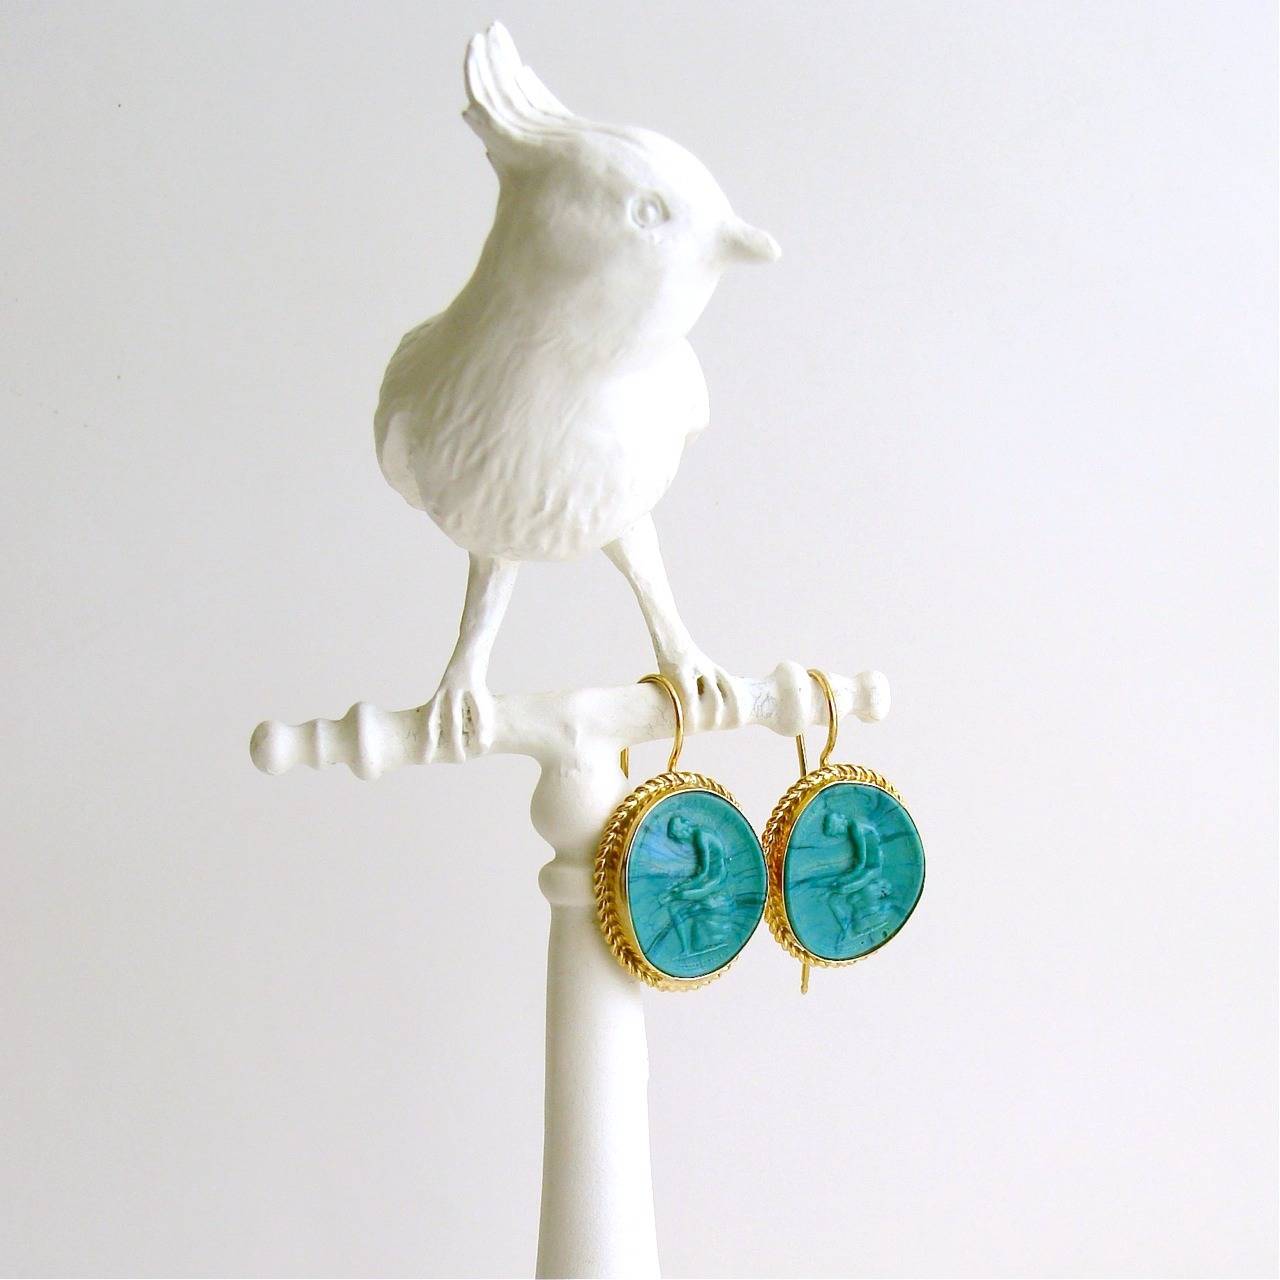 A stunning pair of malachite green intaglio/cameo earrings, with wispy veins of azurite blue, have been surrounded by a delicate twisted wire bezel.  These unique earrings dangle from elongated ear wires which are artfully designed to latch securely